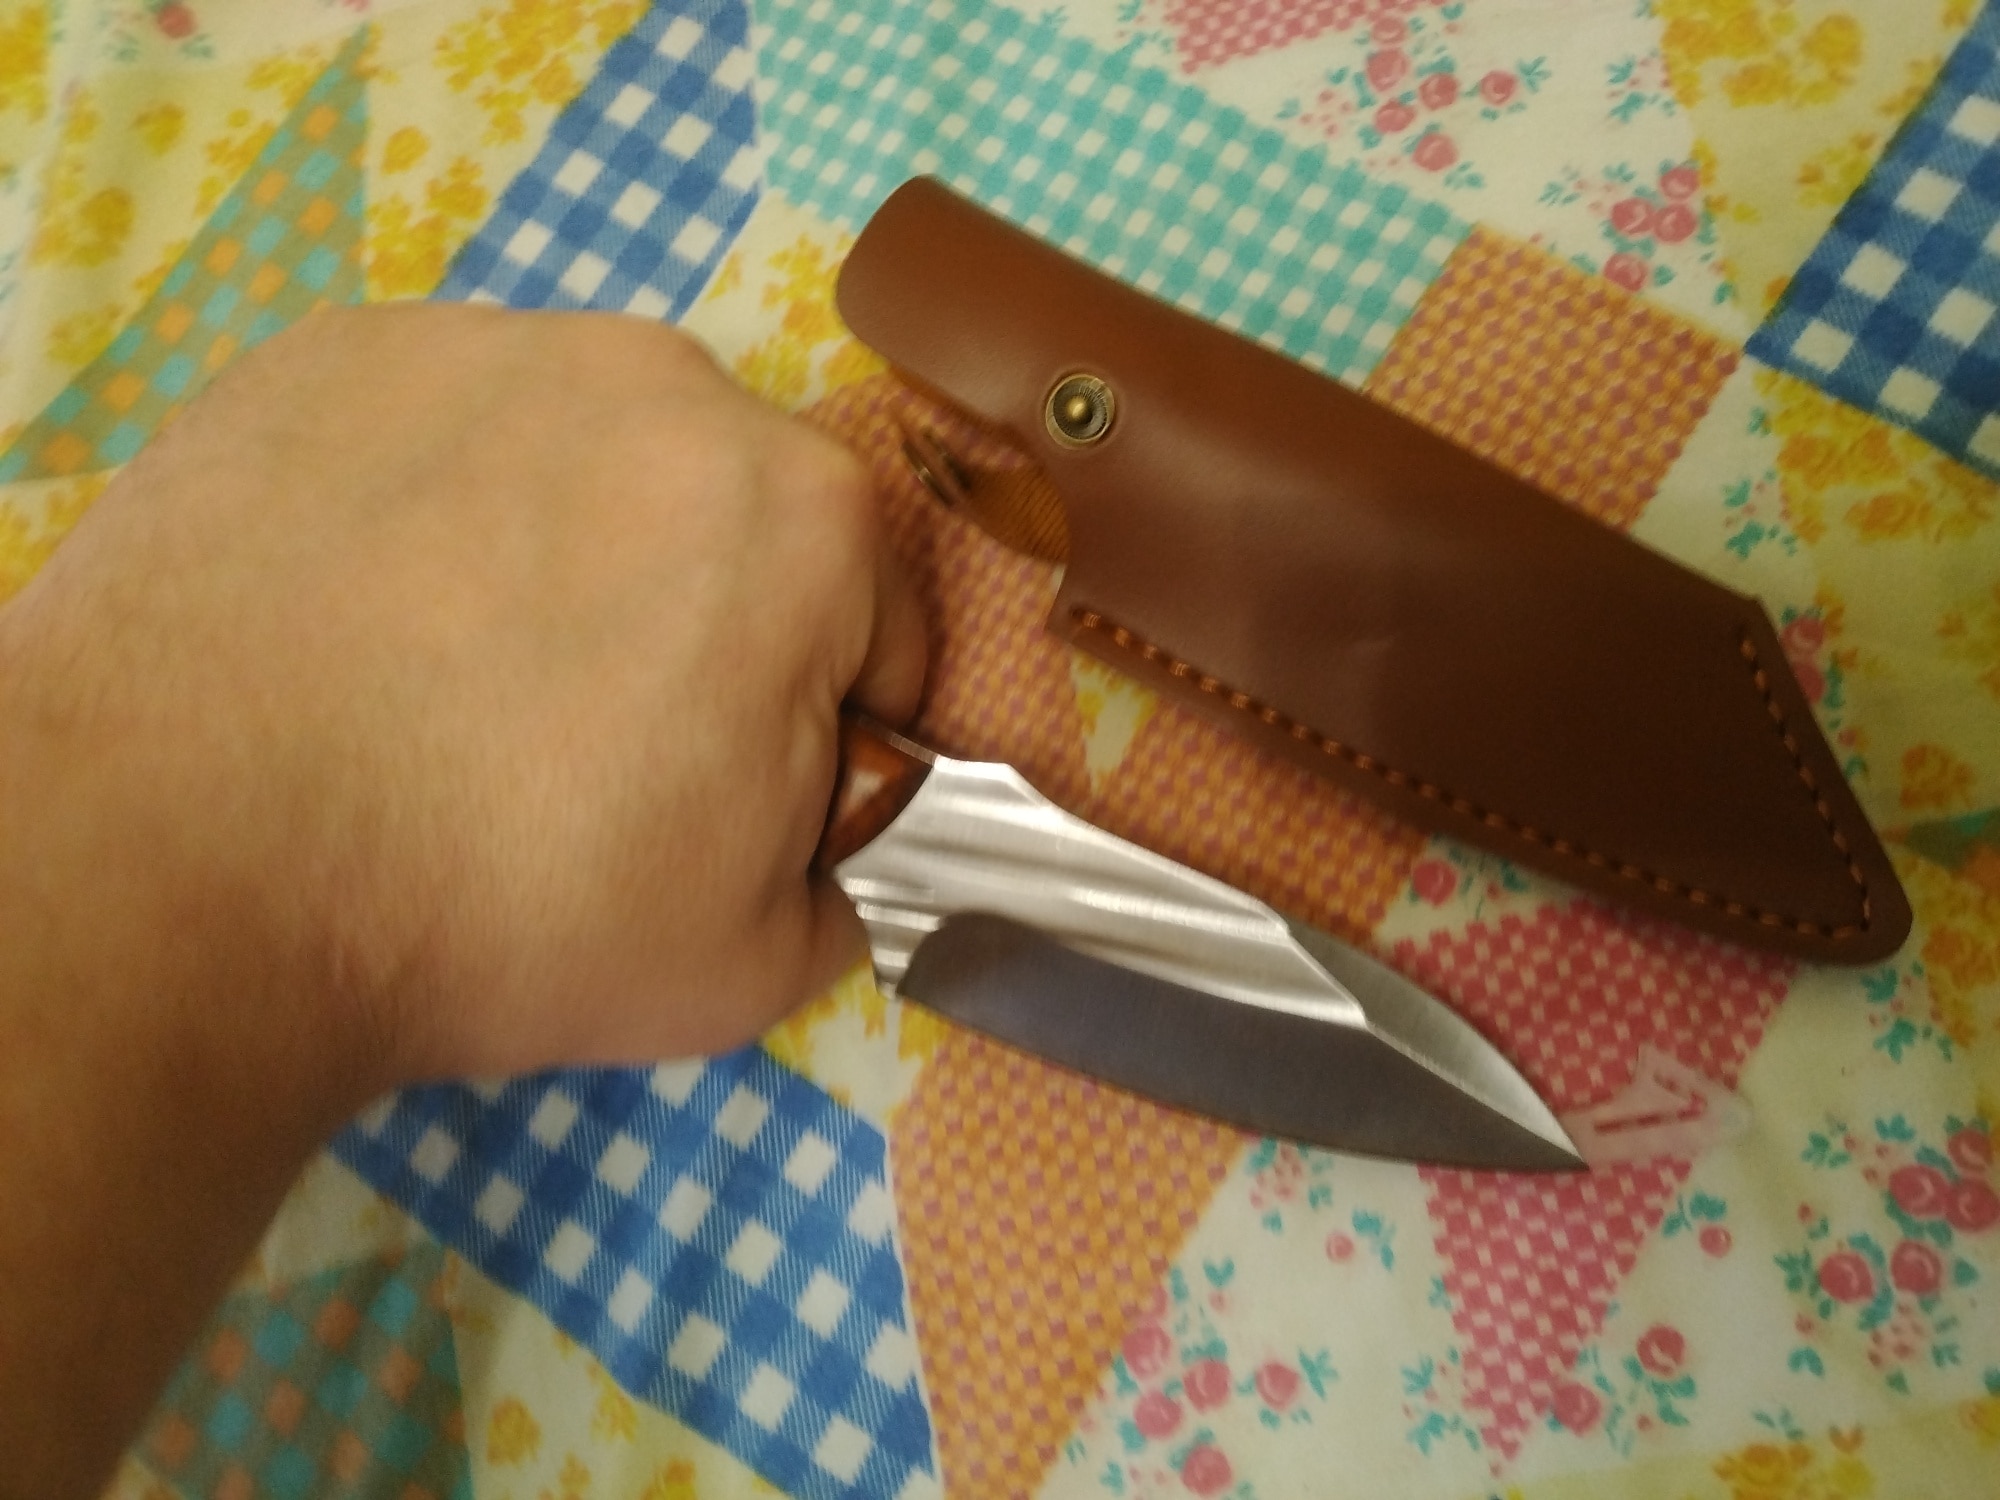 Multi-purpose Kitchen Knife for Fruit, Meat, and Other Cutting Needs photo review